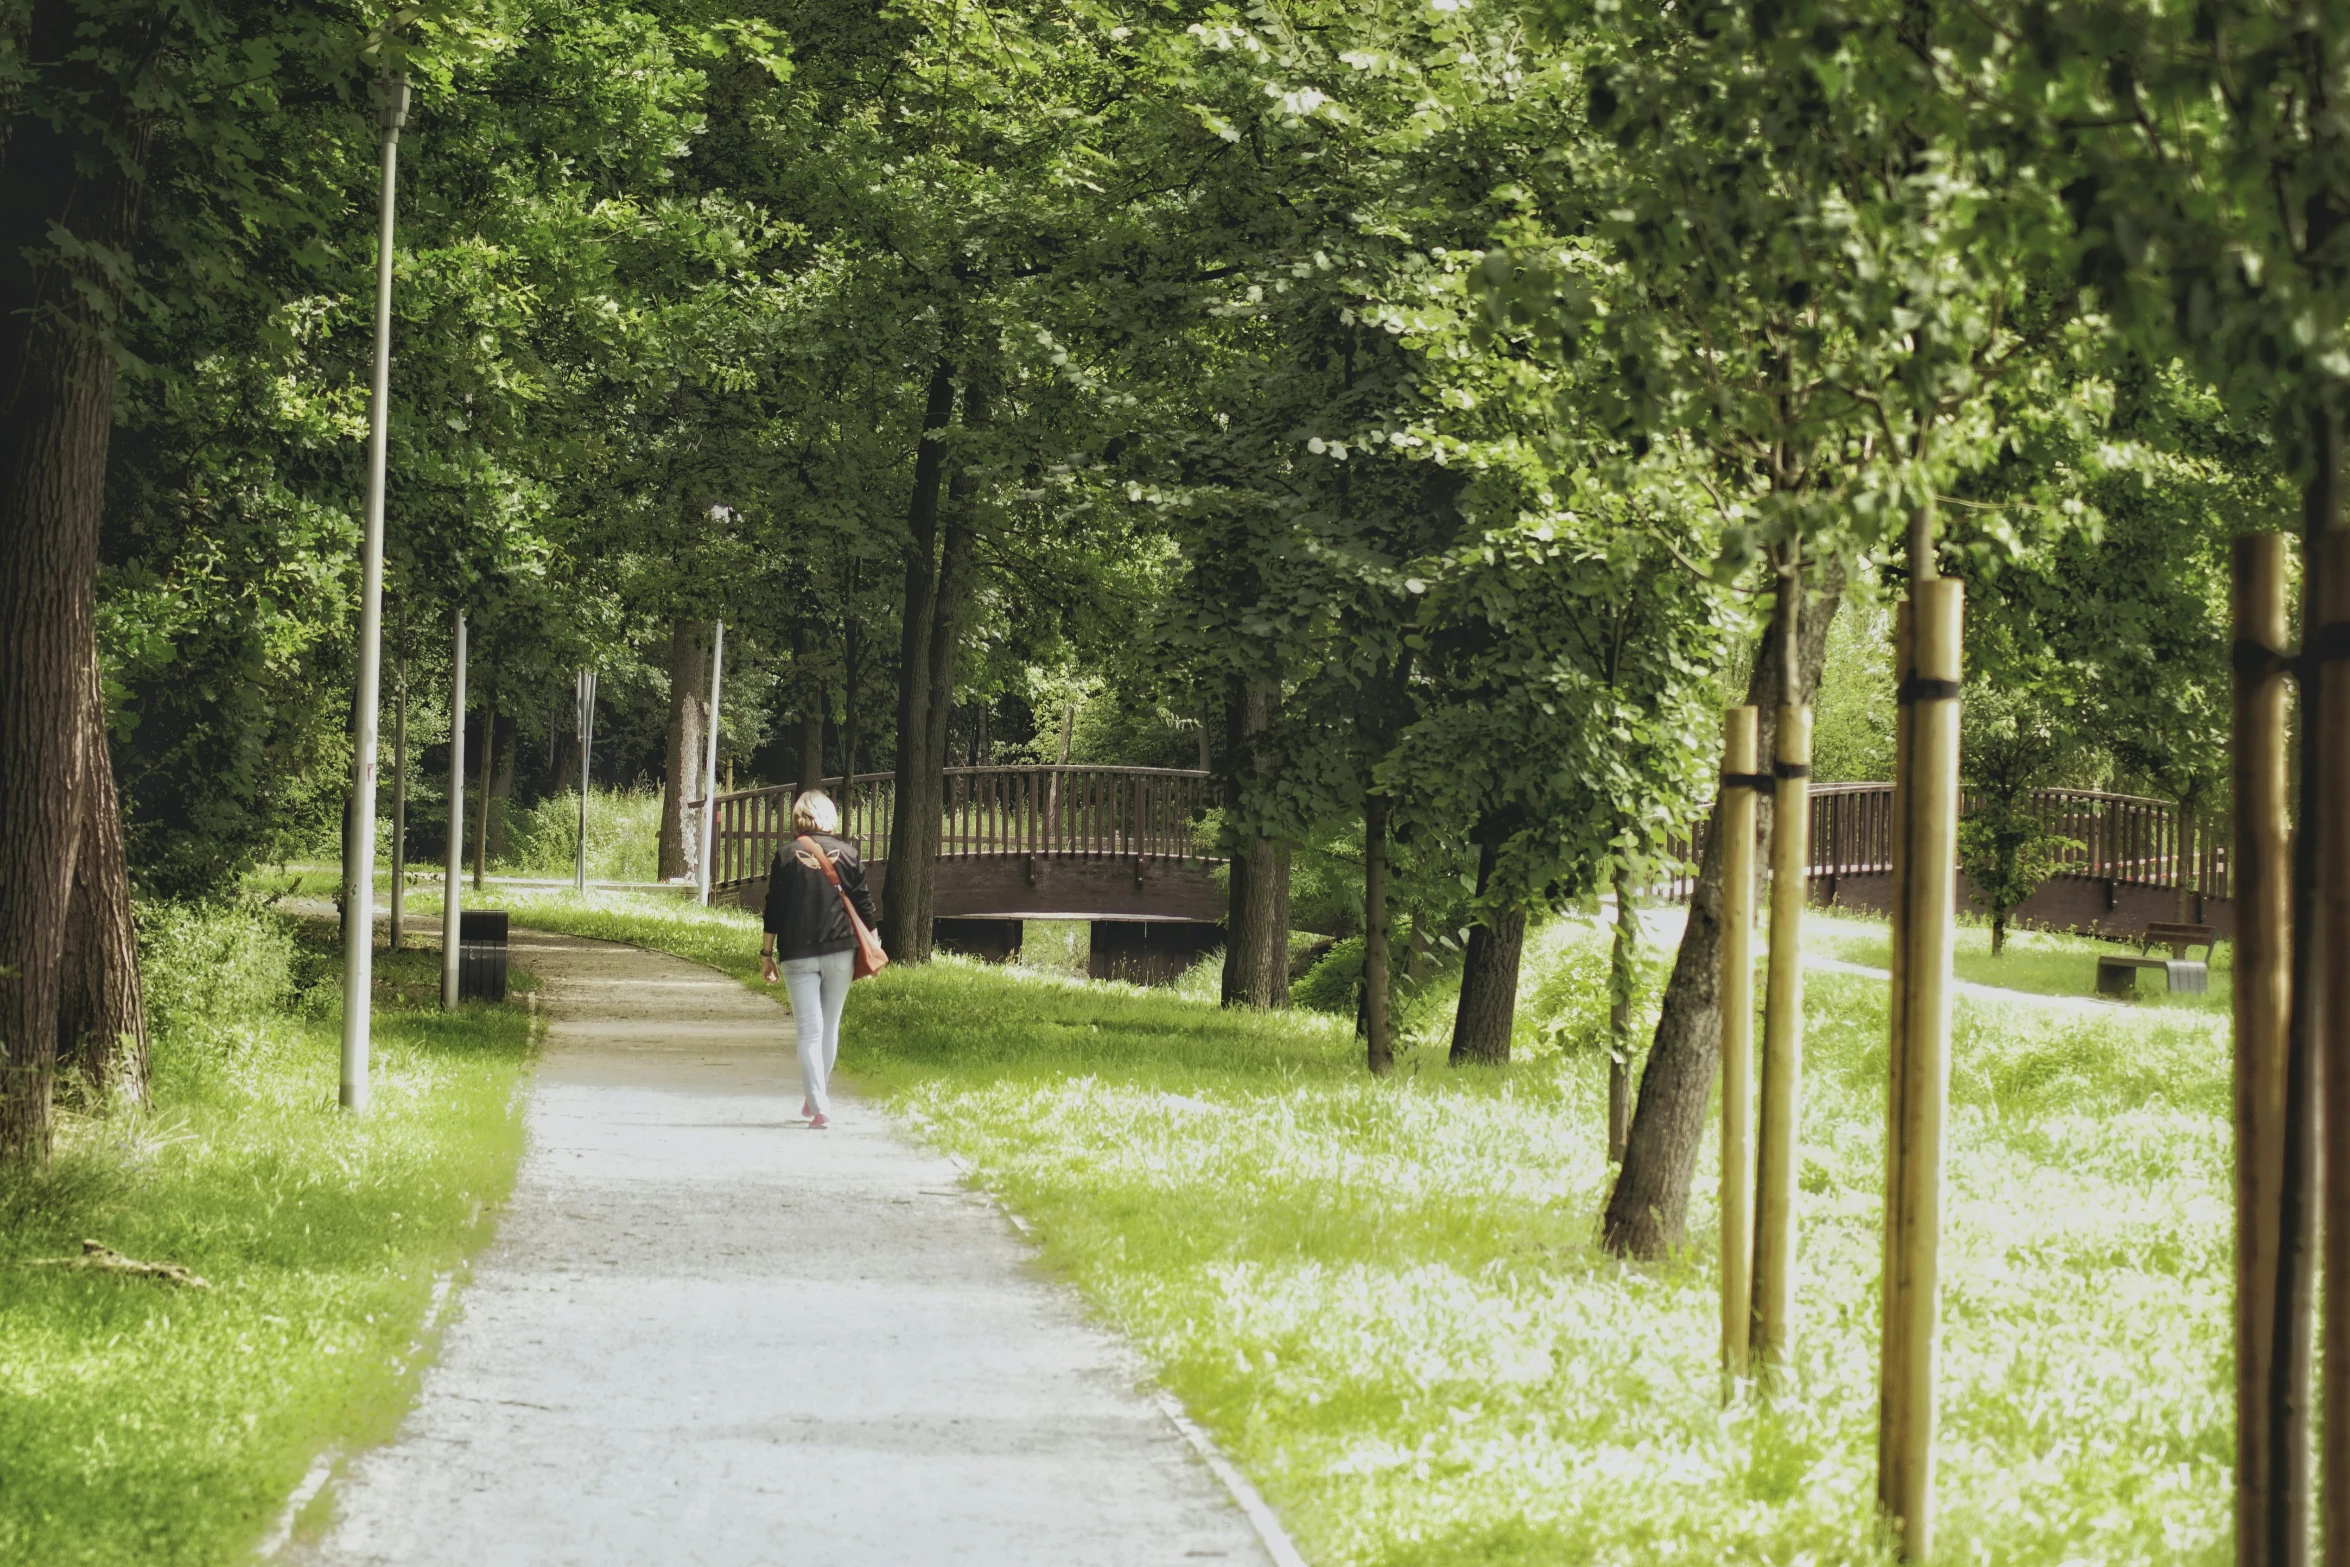 a person walking down the path in a green forest